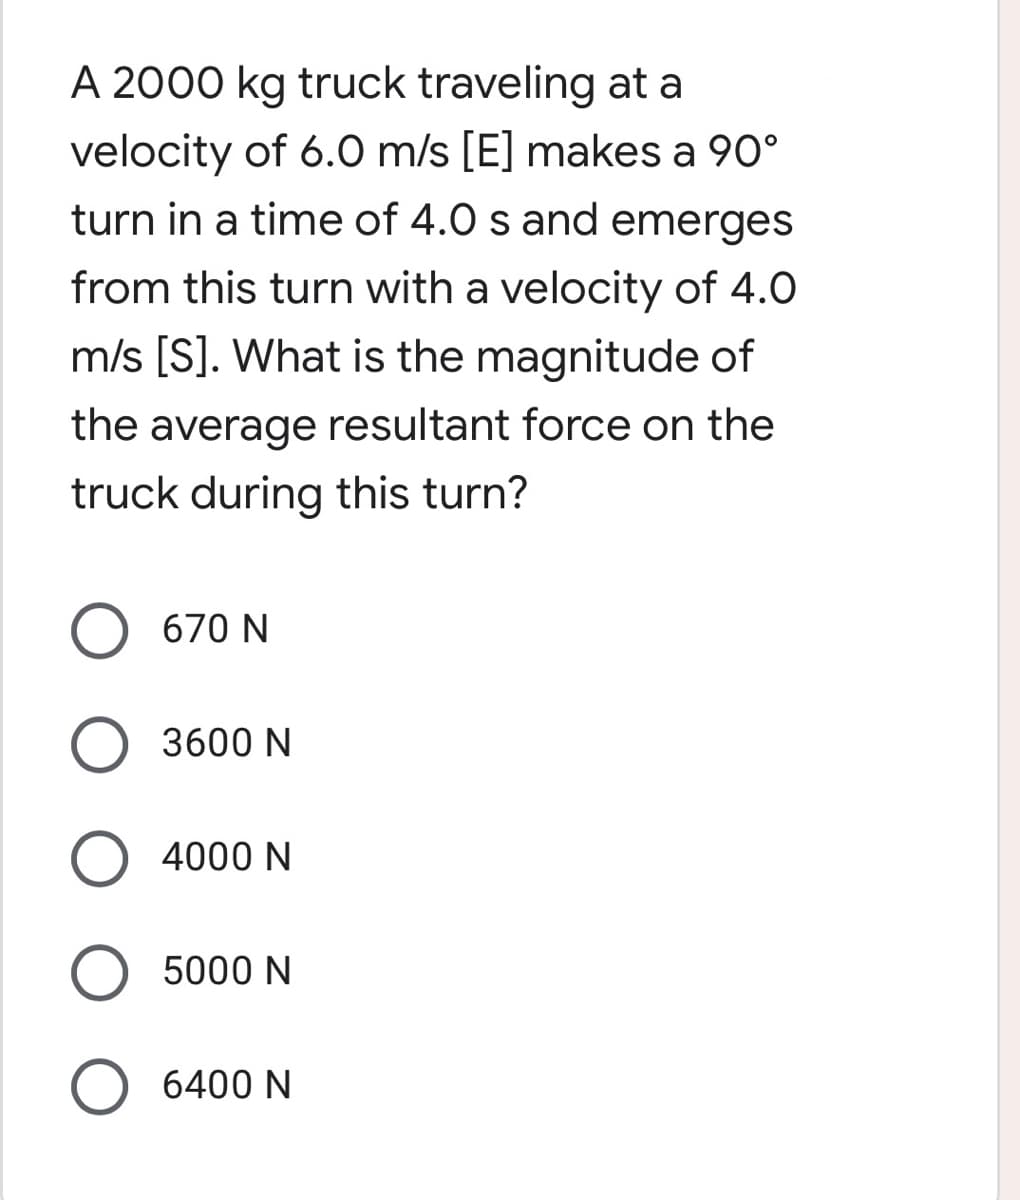 A 2000 kg truck traveling at a
velocity of 6.0 m/s [E] makes a 90°
turn in a time of 4.0 s and emerges
from this turn with a velocity of 4.0
m/s [S]. What is the magnitude of
the average resultant force on the
truck during this turn?
O 670 N
O 3600 N
O 4000 N
O 5000 N
O 6400 N